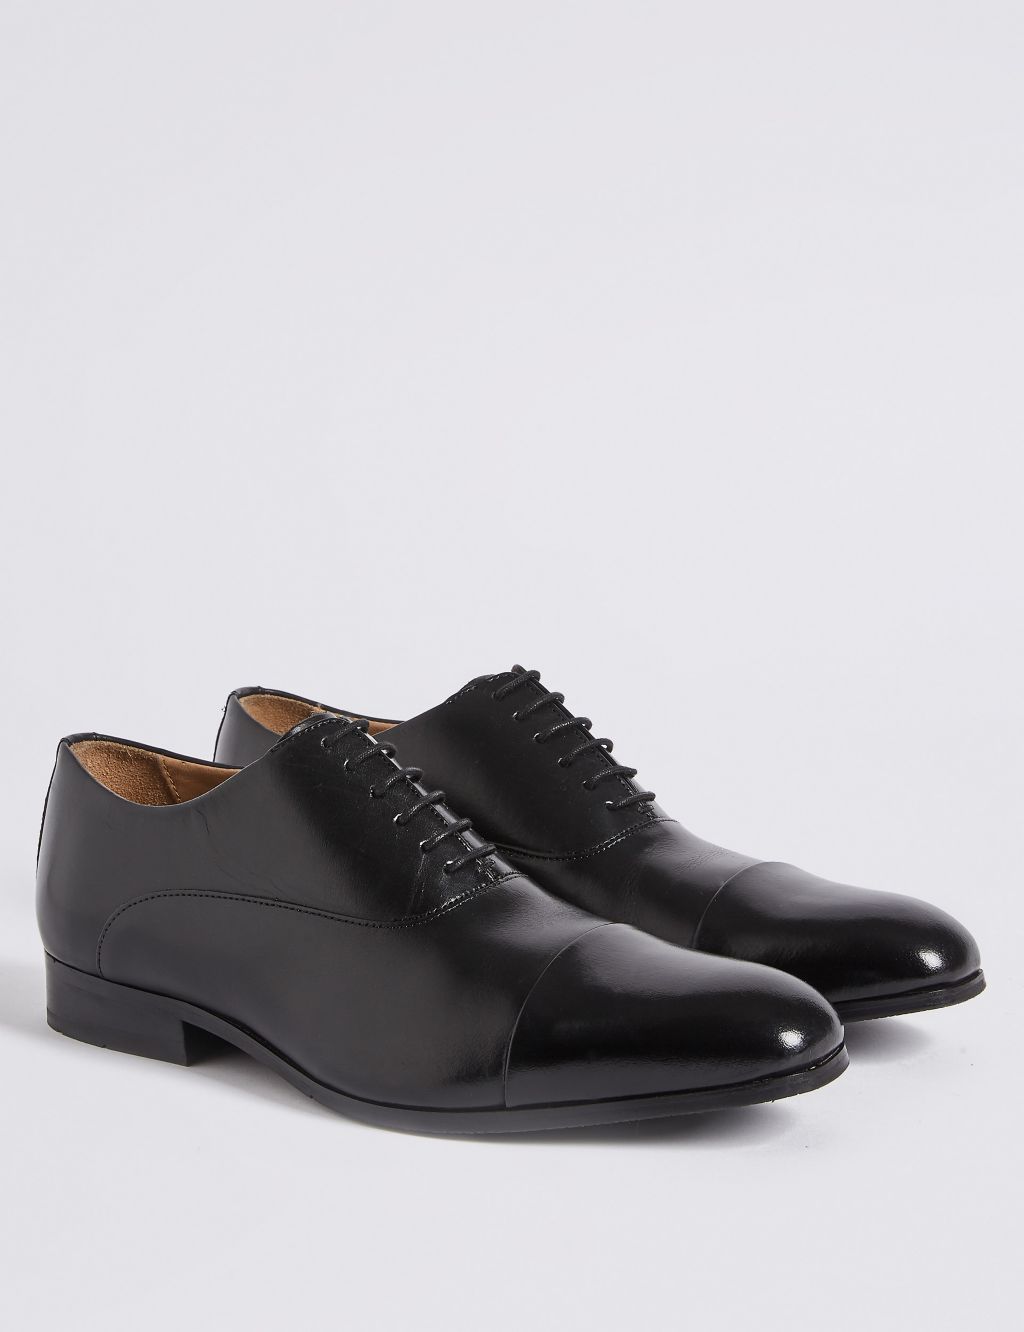 Wide Fit Leather Oxford Shoes image 2